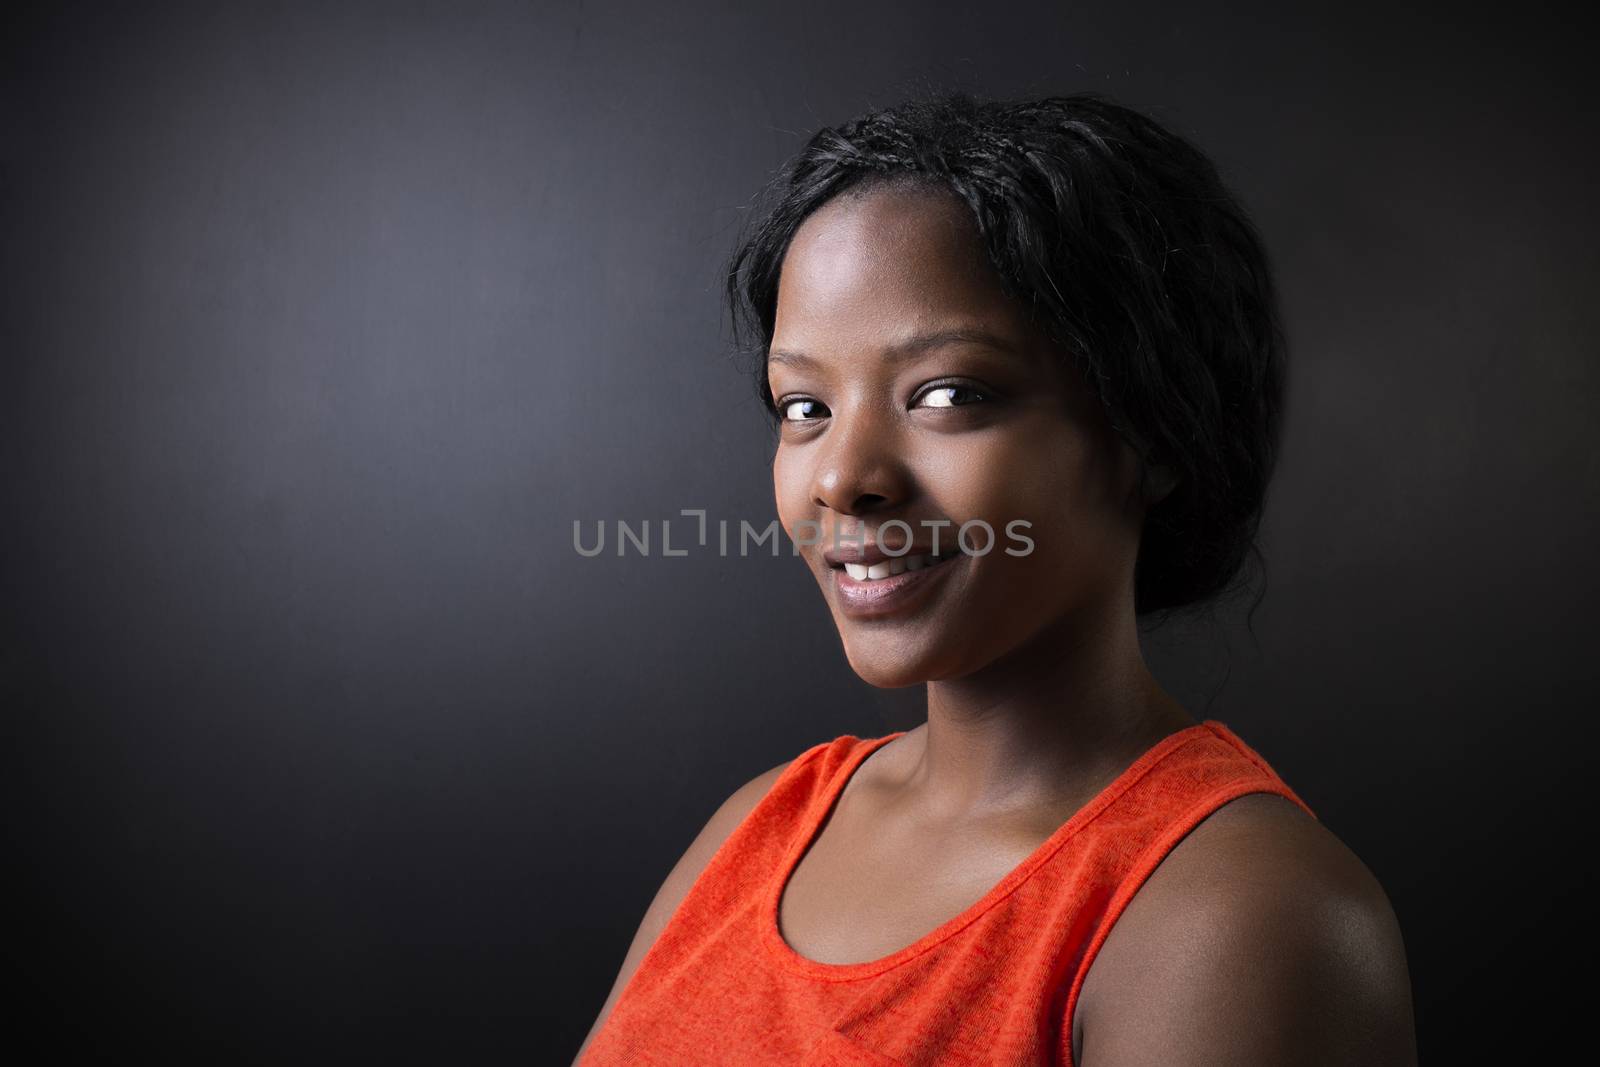 South African or African American woman teacher or student on chalk black board background